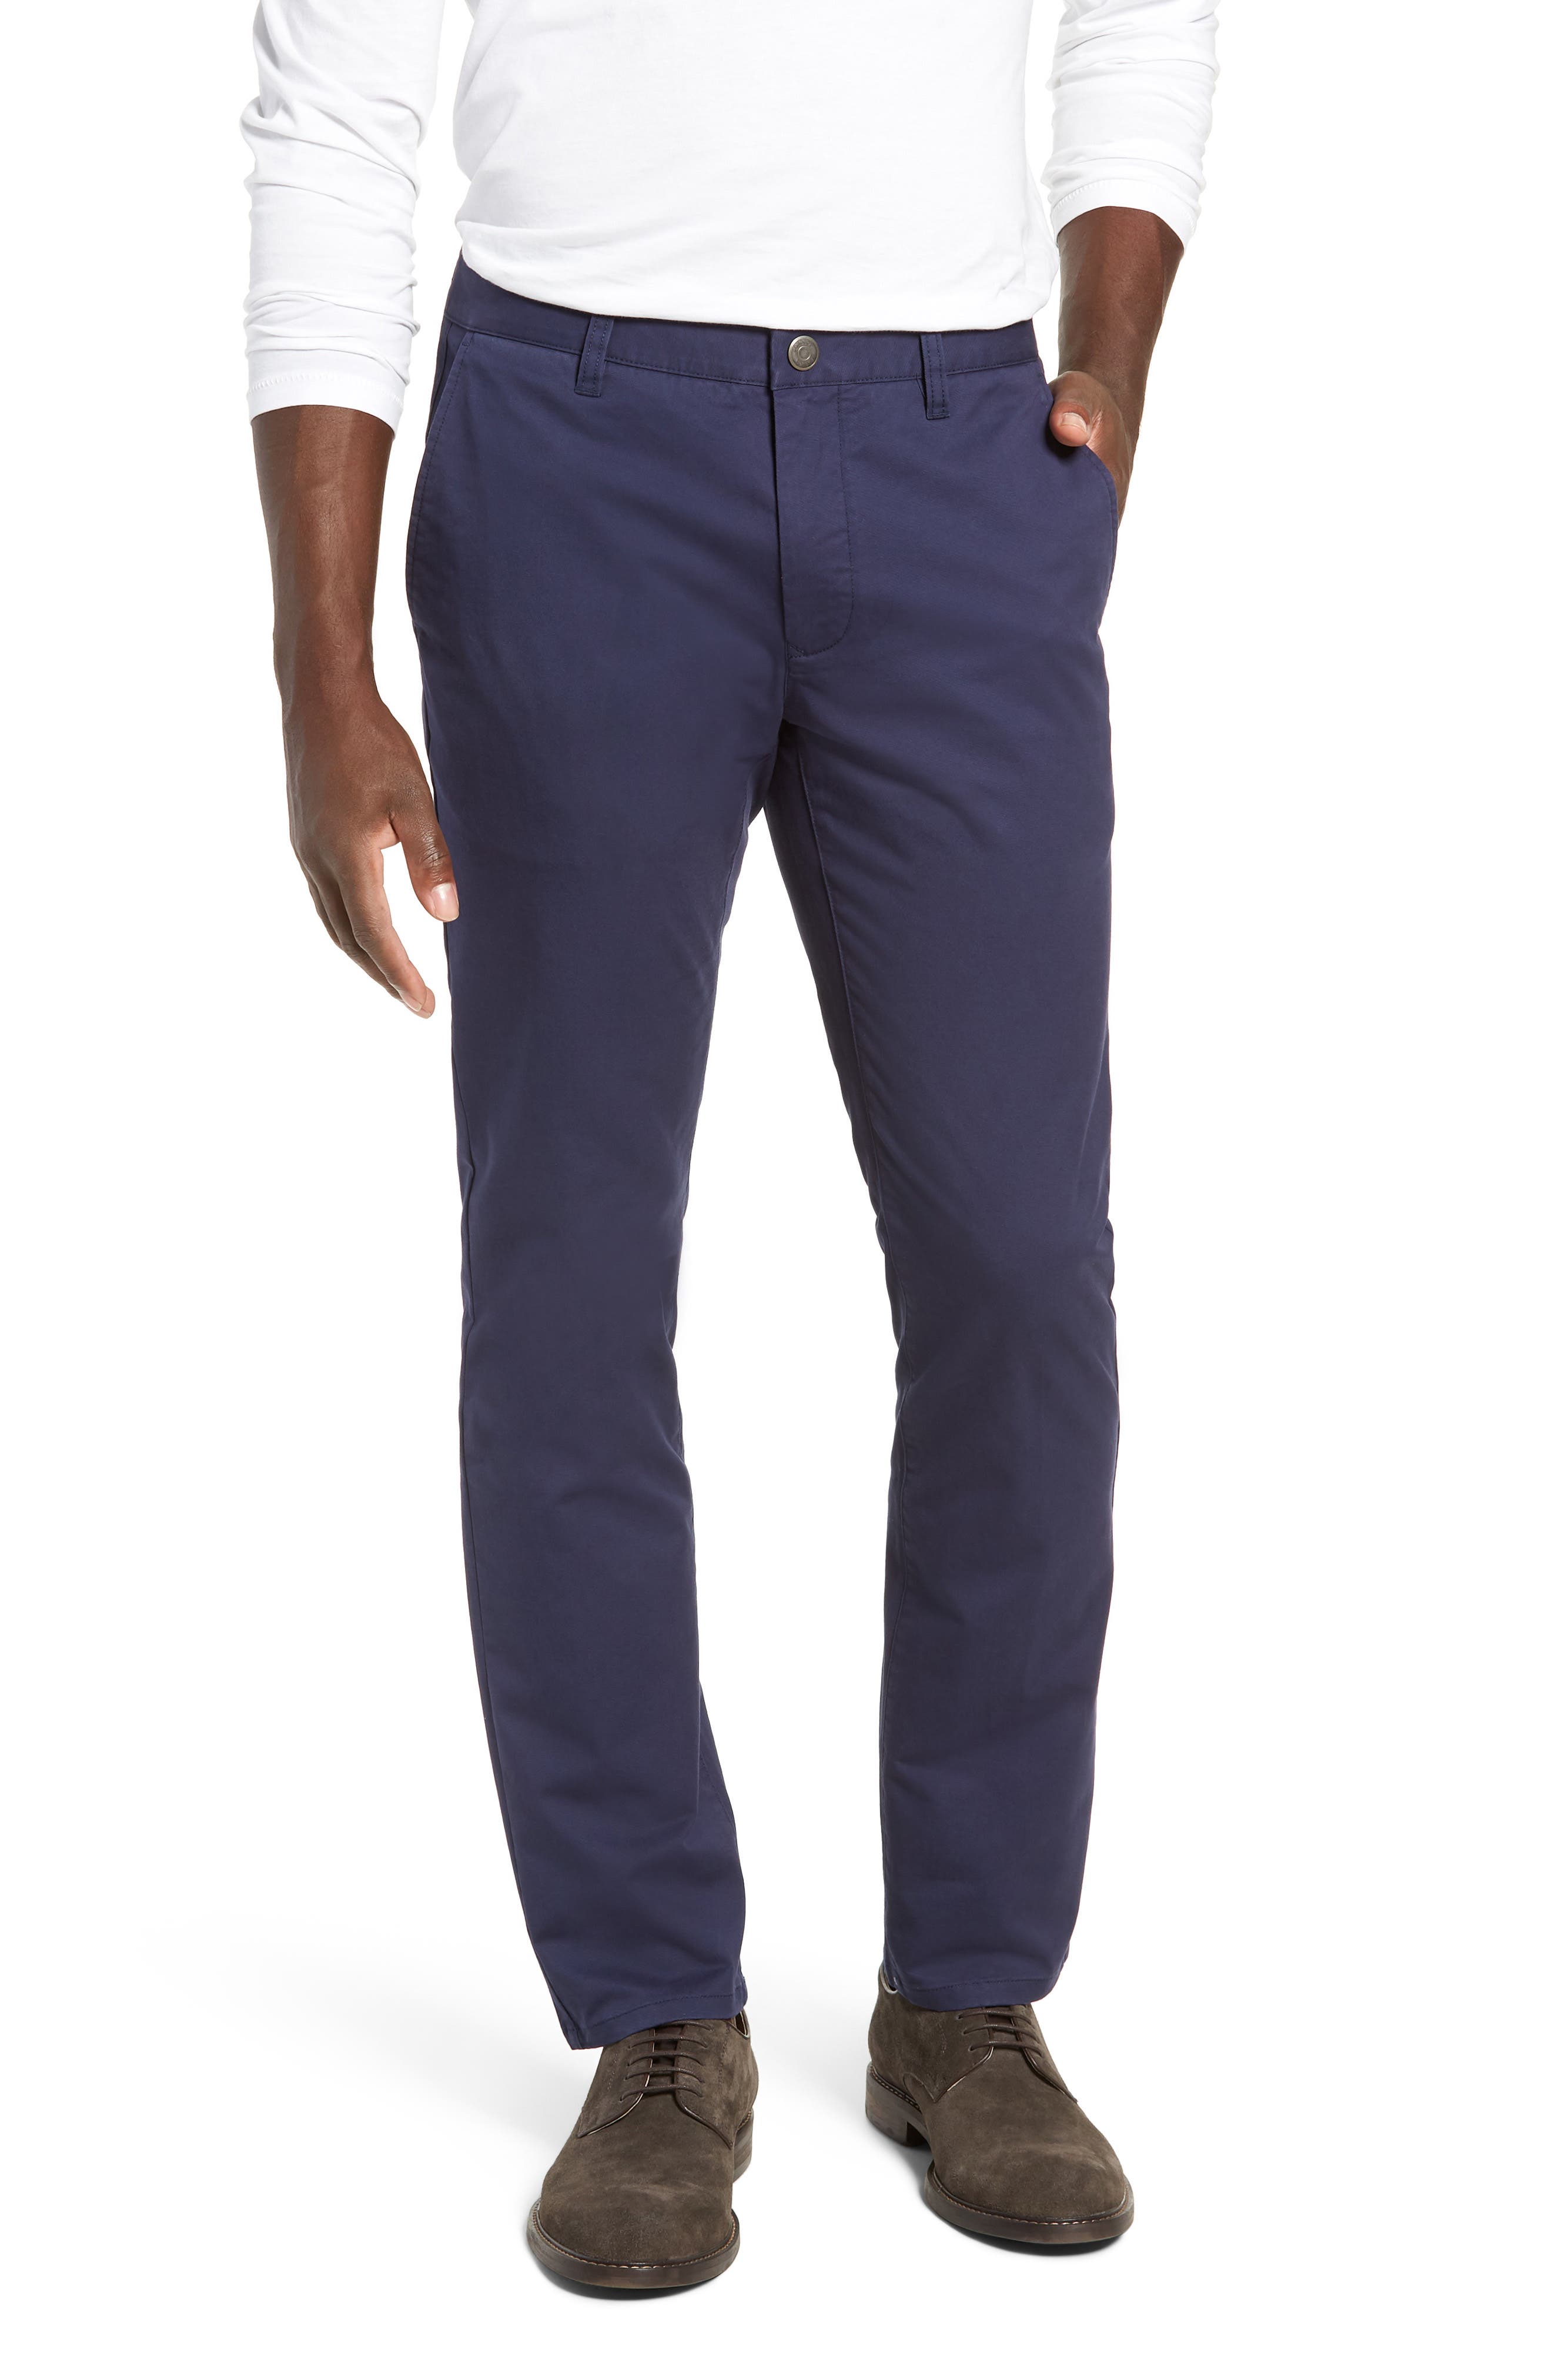 BONOBOS TAILORED FIT WASHED STRETCH COTTON CHINOS,190516870140